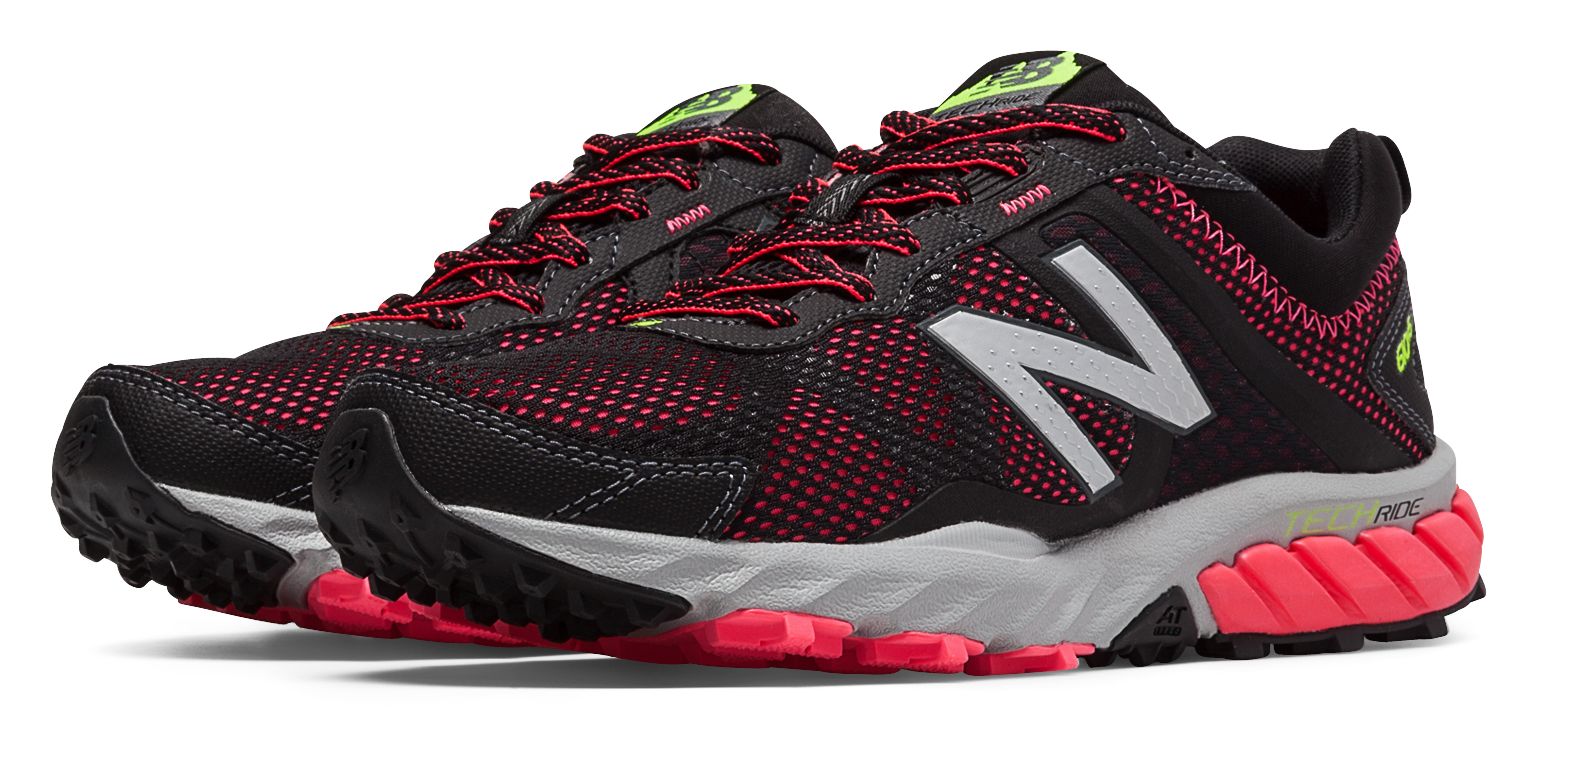 New Balance WT610-V5 on Sale - Discounts Up to 30% Off on WT610LB5. Joe\u0027s  New Balance Outlet featuring discount shoes ...